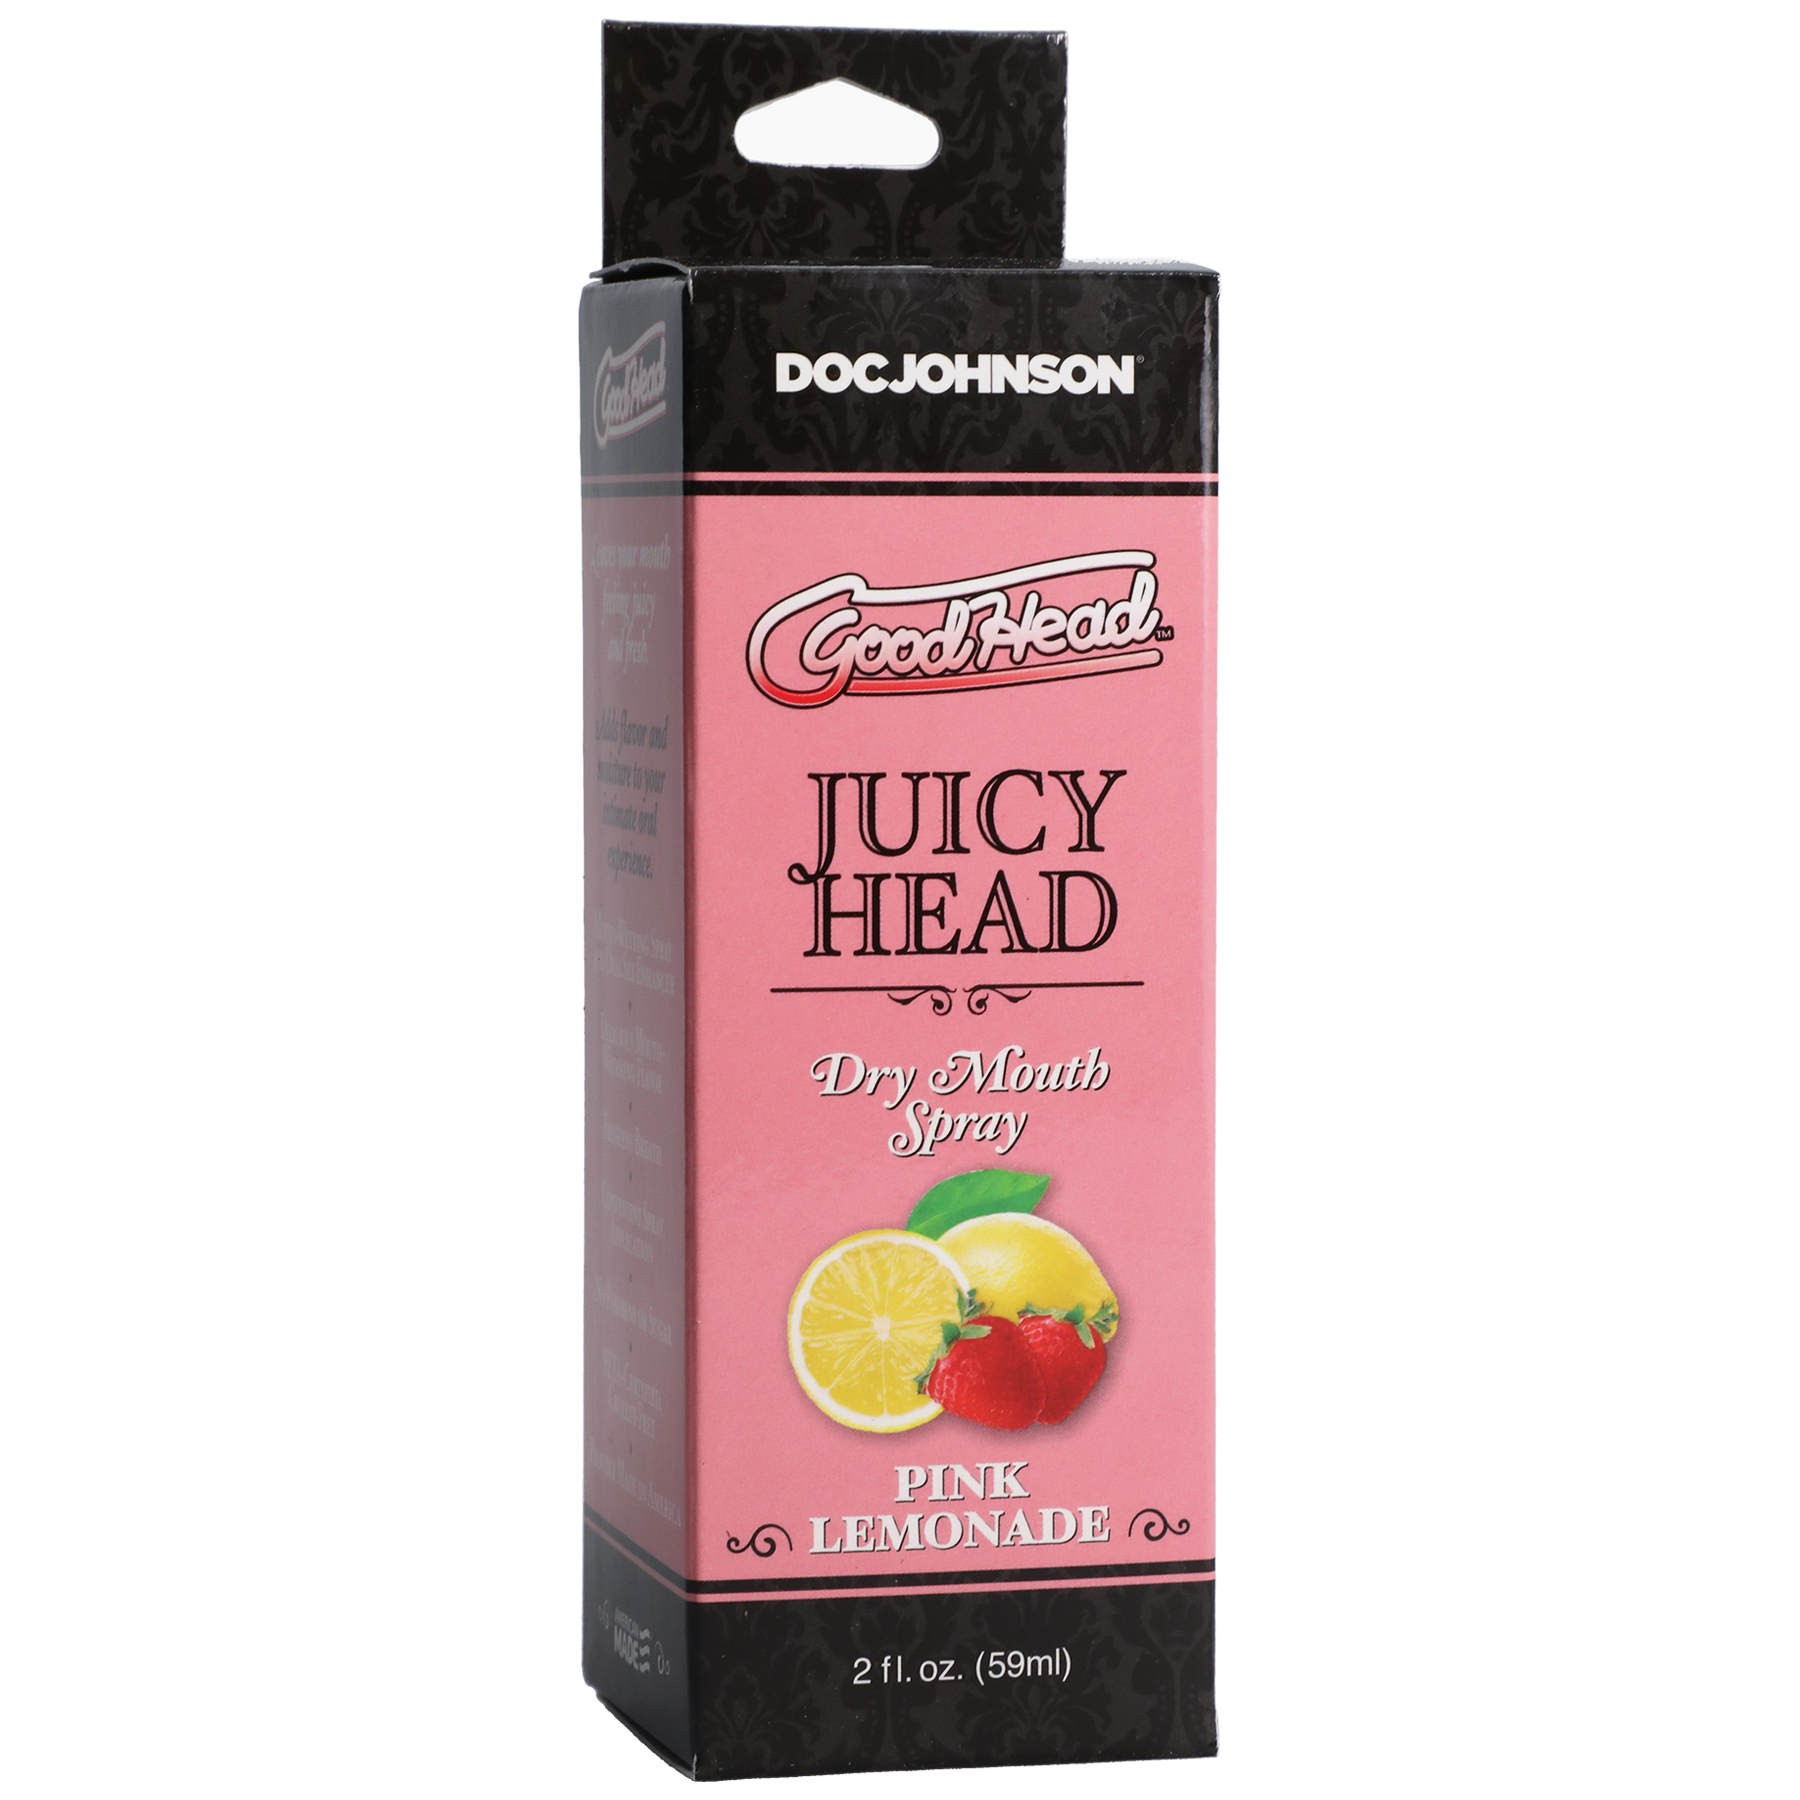 Photo of the package for the GoodHead Juicy Head from Doc Johnson (pink lemonade).